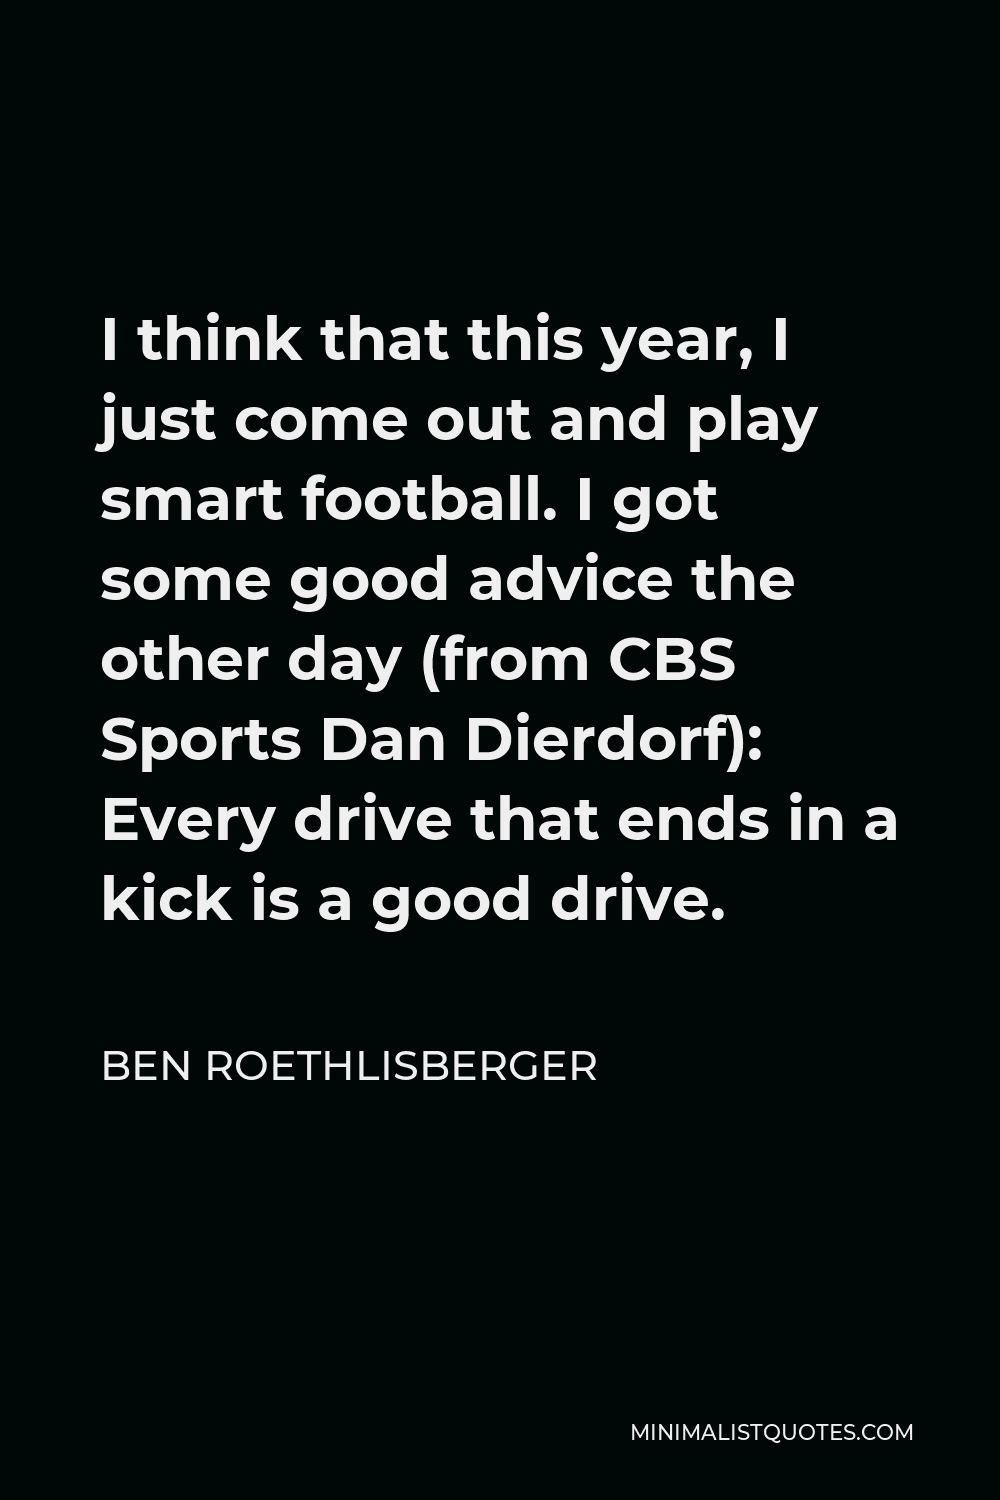 Ben Roethlisberger Quote - I think that this year, I just come out and play smart football. I got some good advice the other day (from CBS Sports Dan Dierdorf): Every drive that ends in a kick is a good drive.